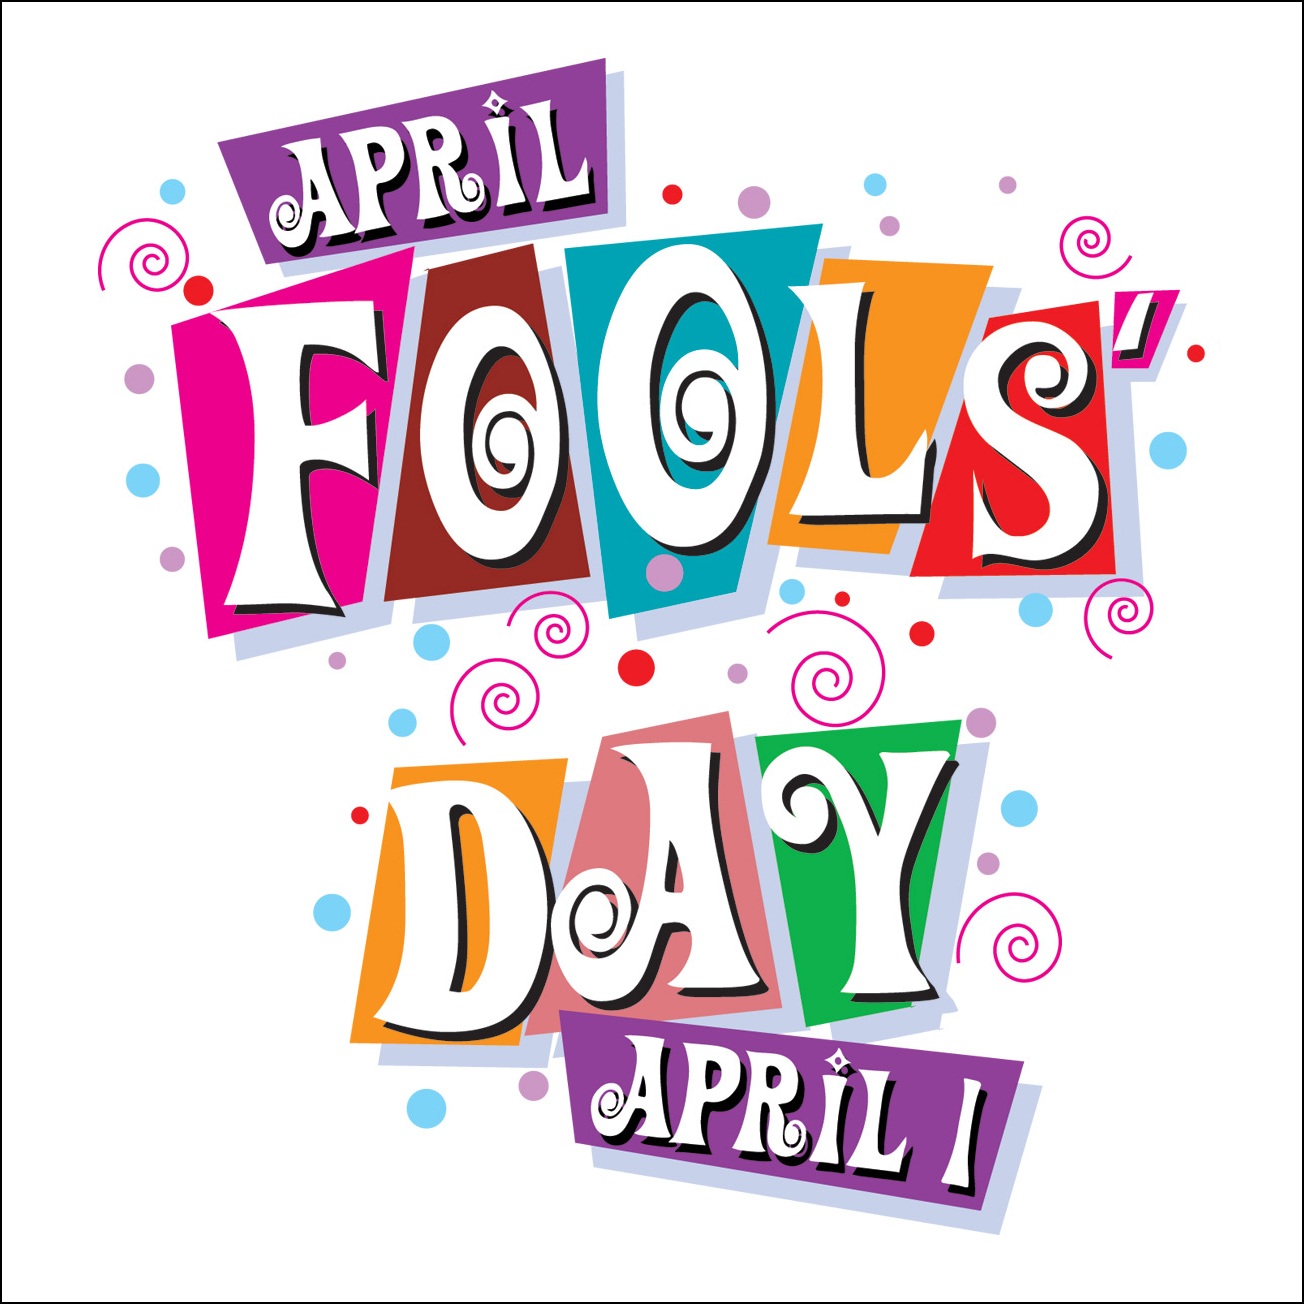 1000+ images about April Fool's Day